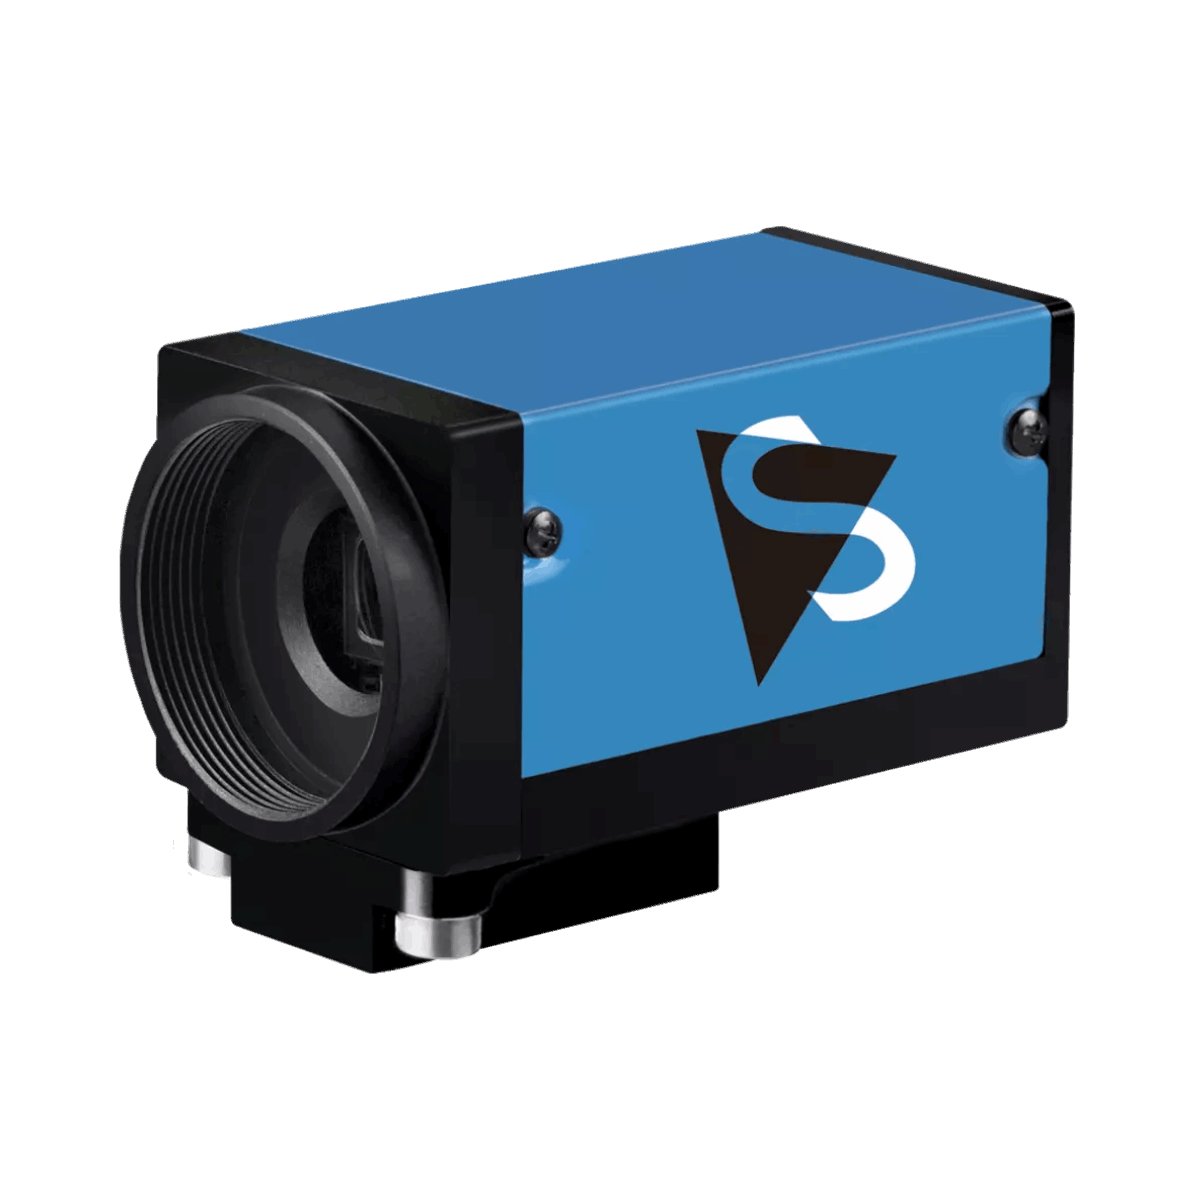 23G Series, The Imaging Source DFK 23GM021 Colour Camera